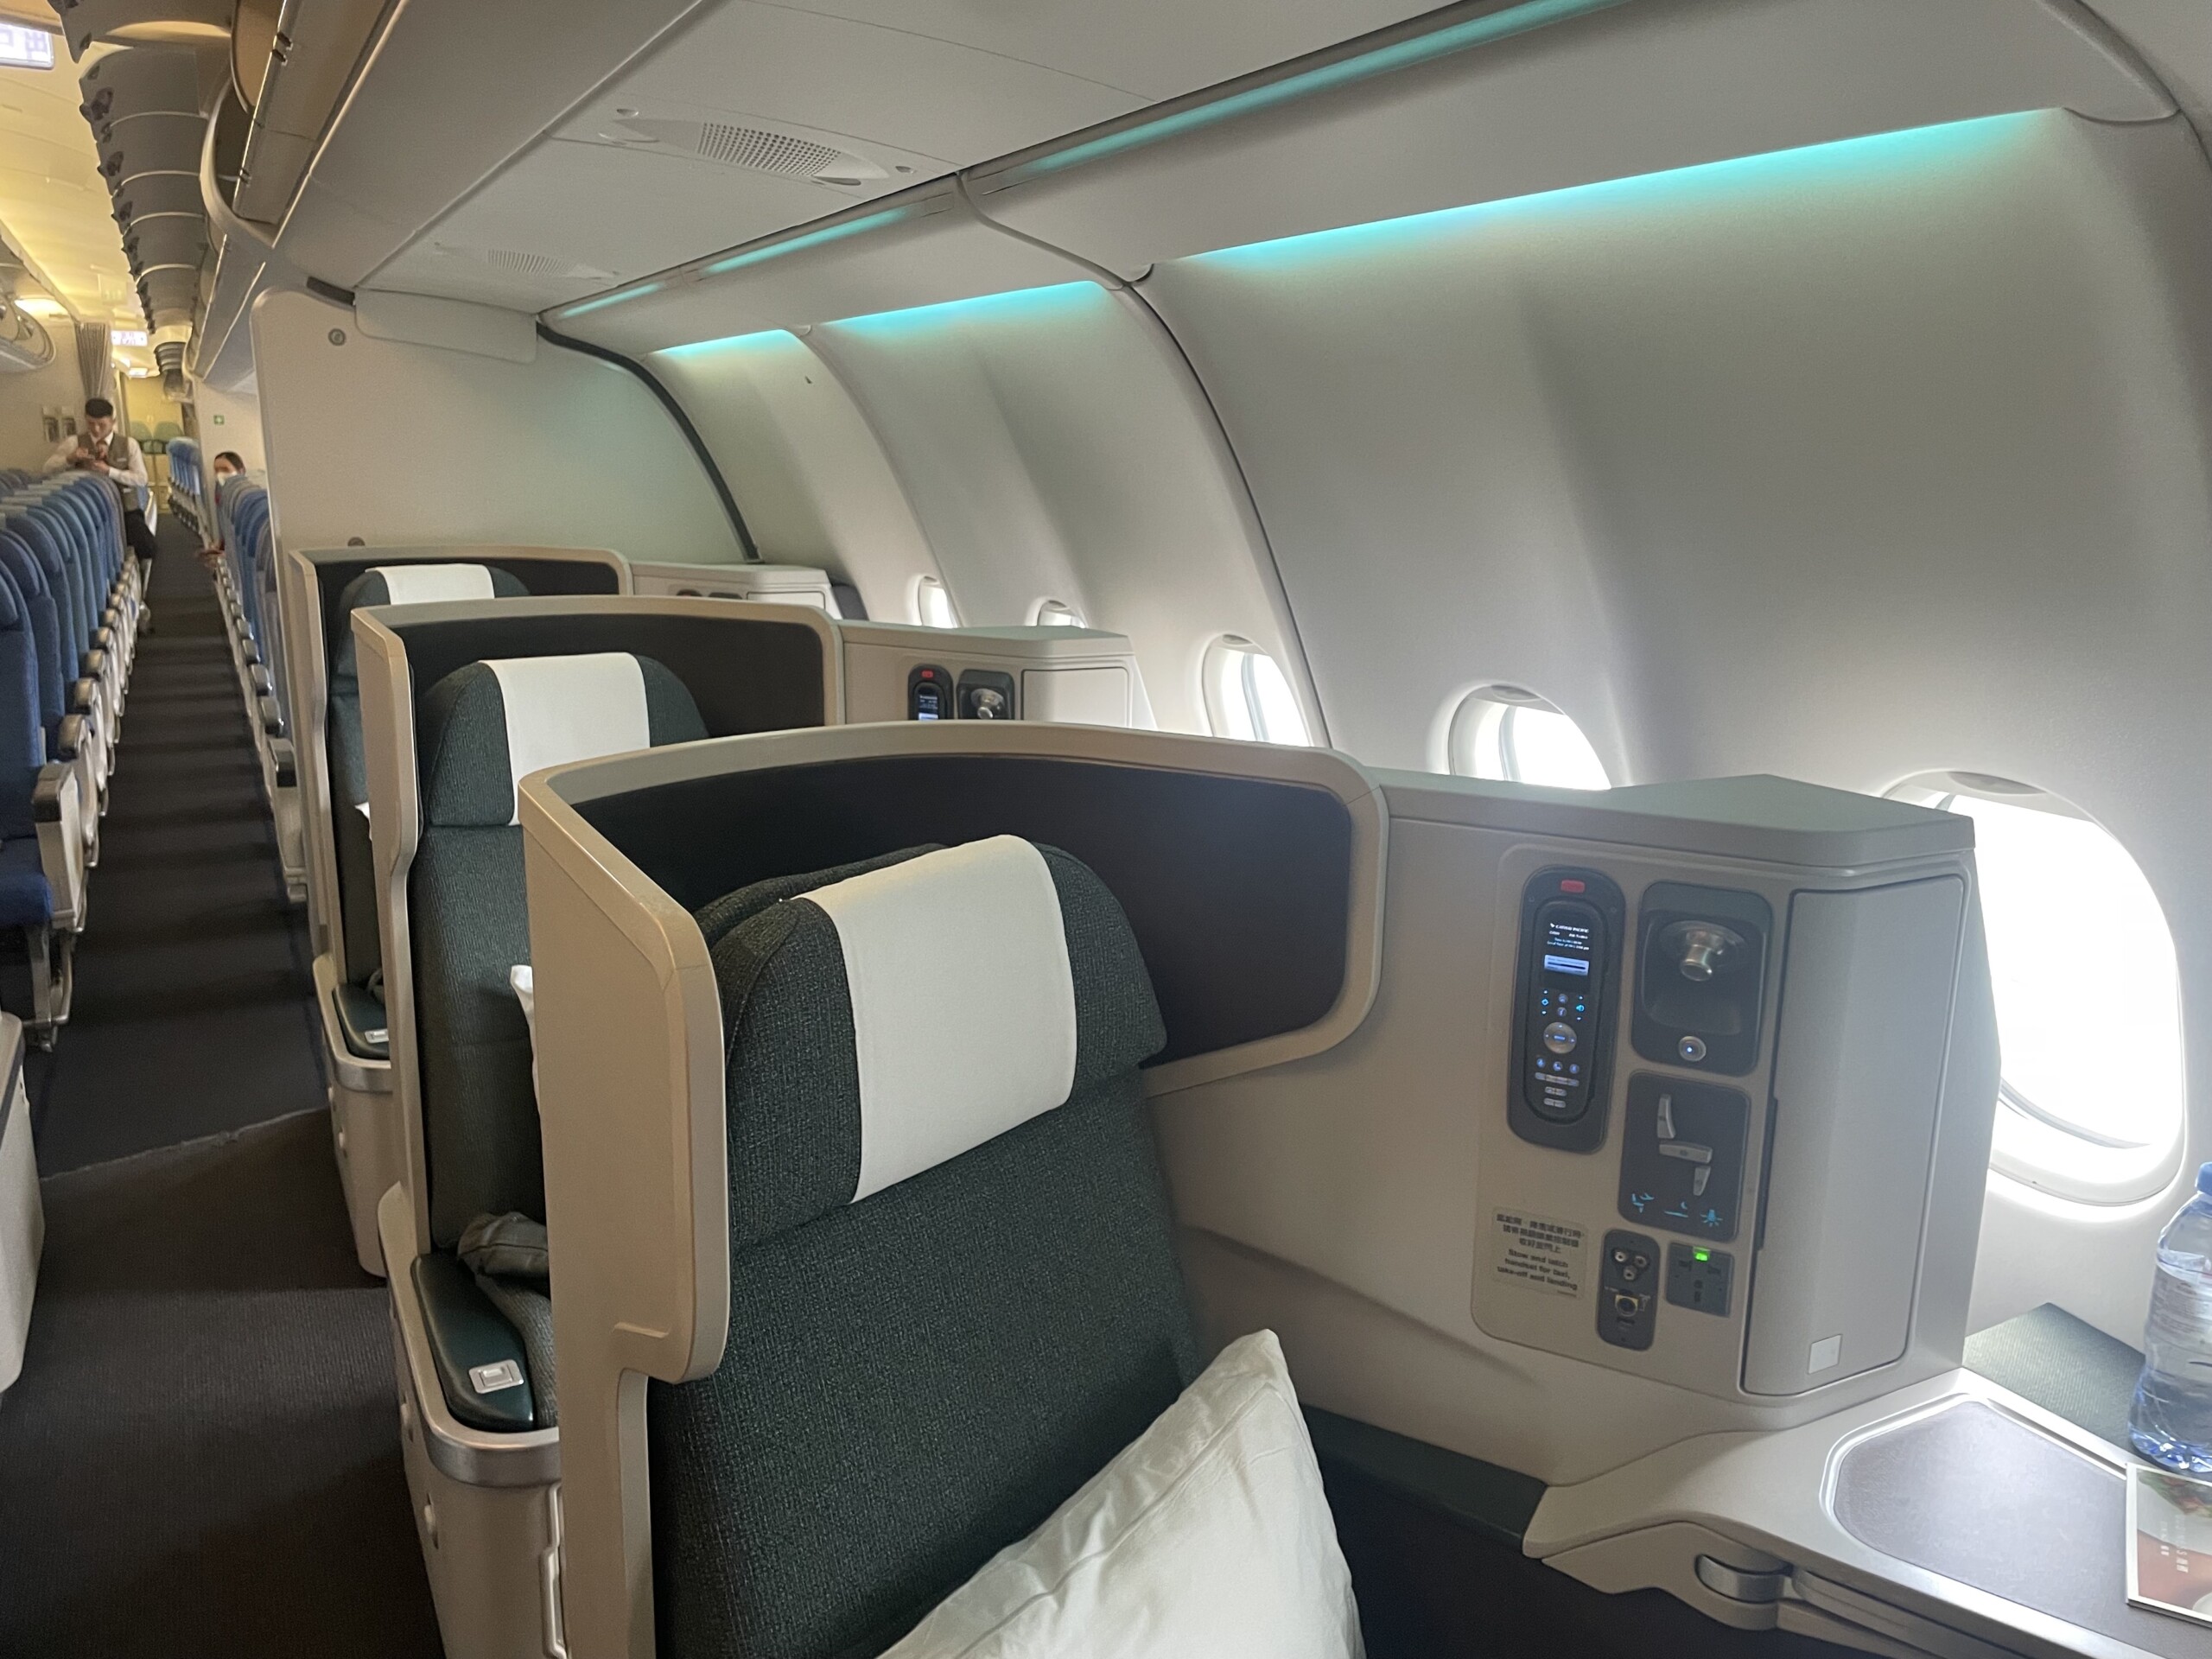 How Will Cathay Pacific Reconfigure its A330s?